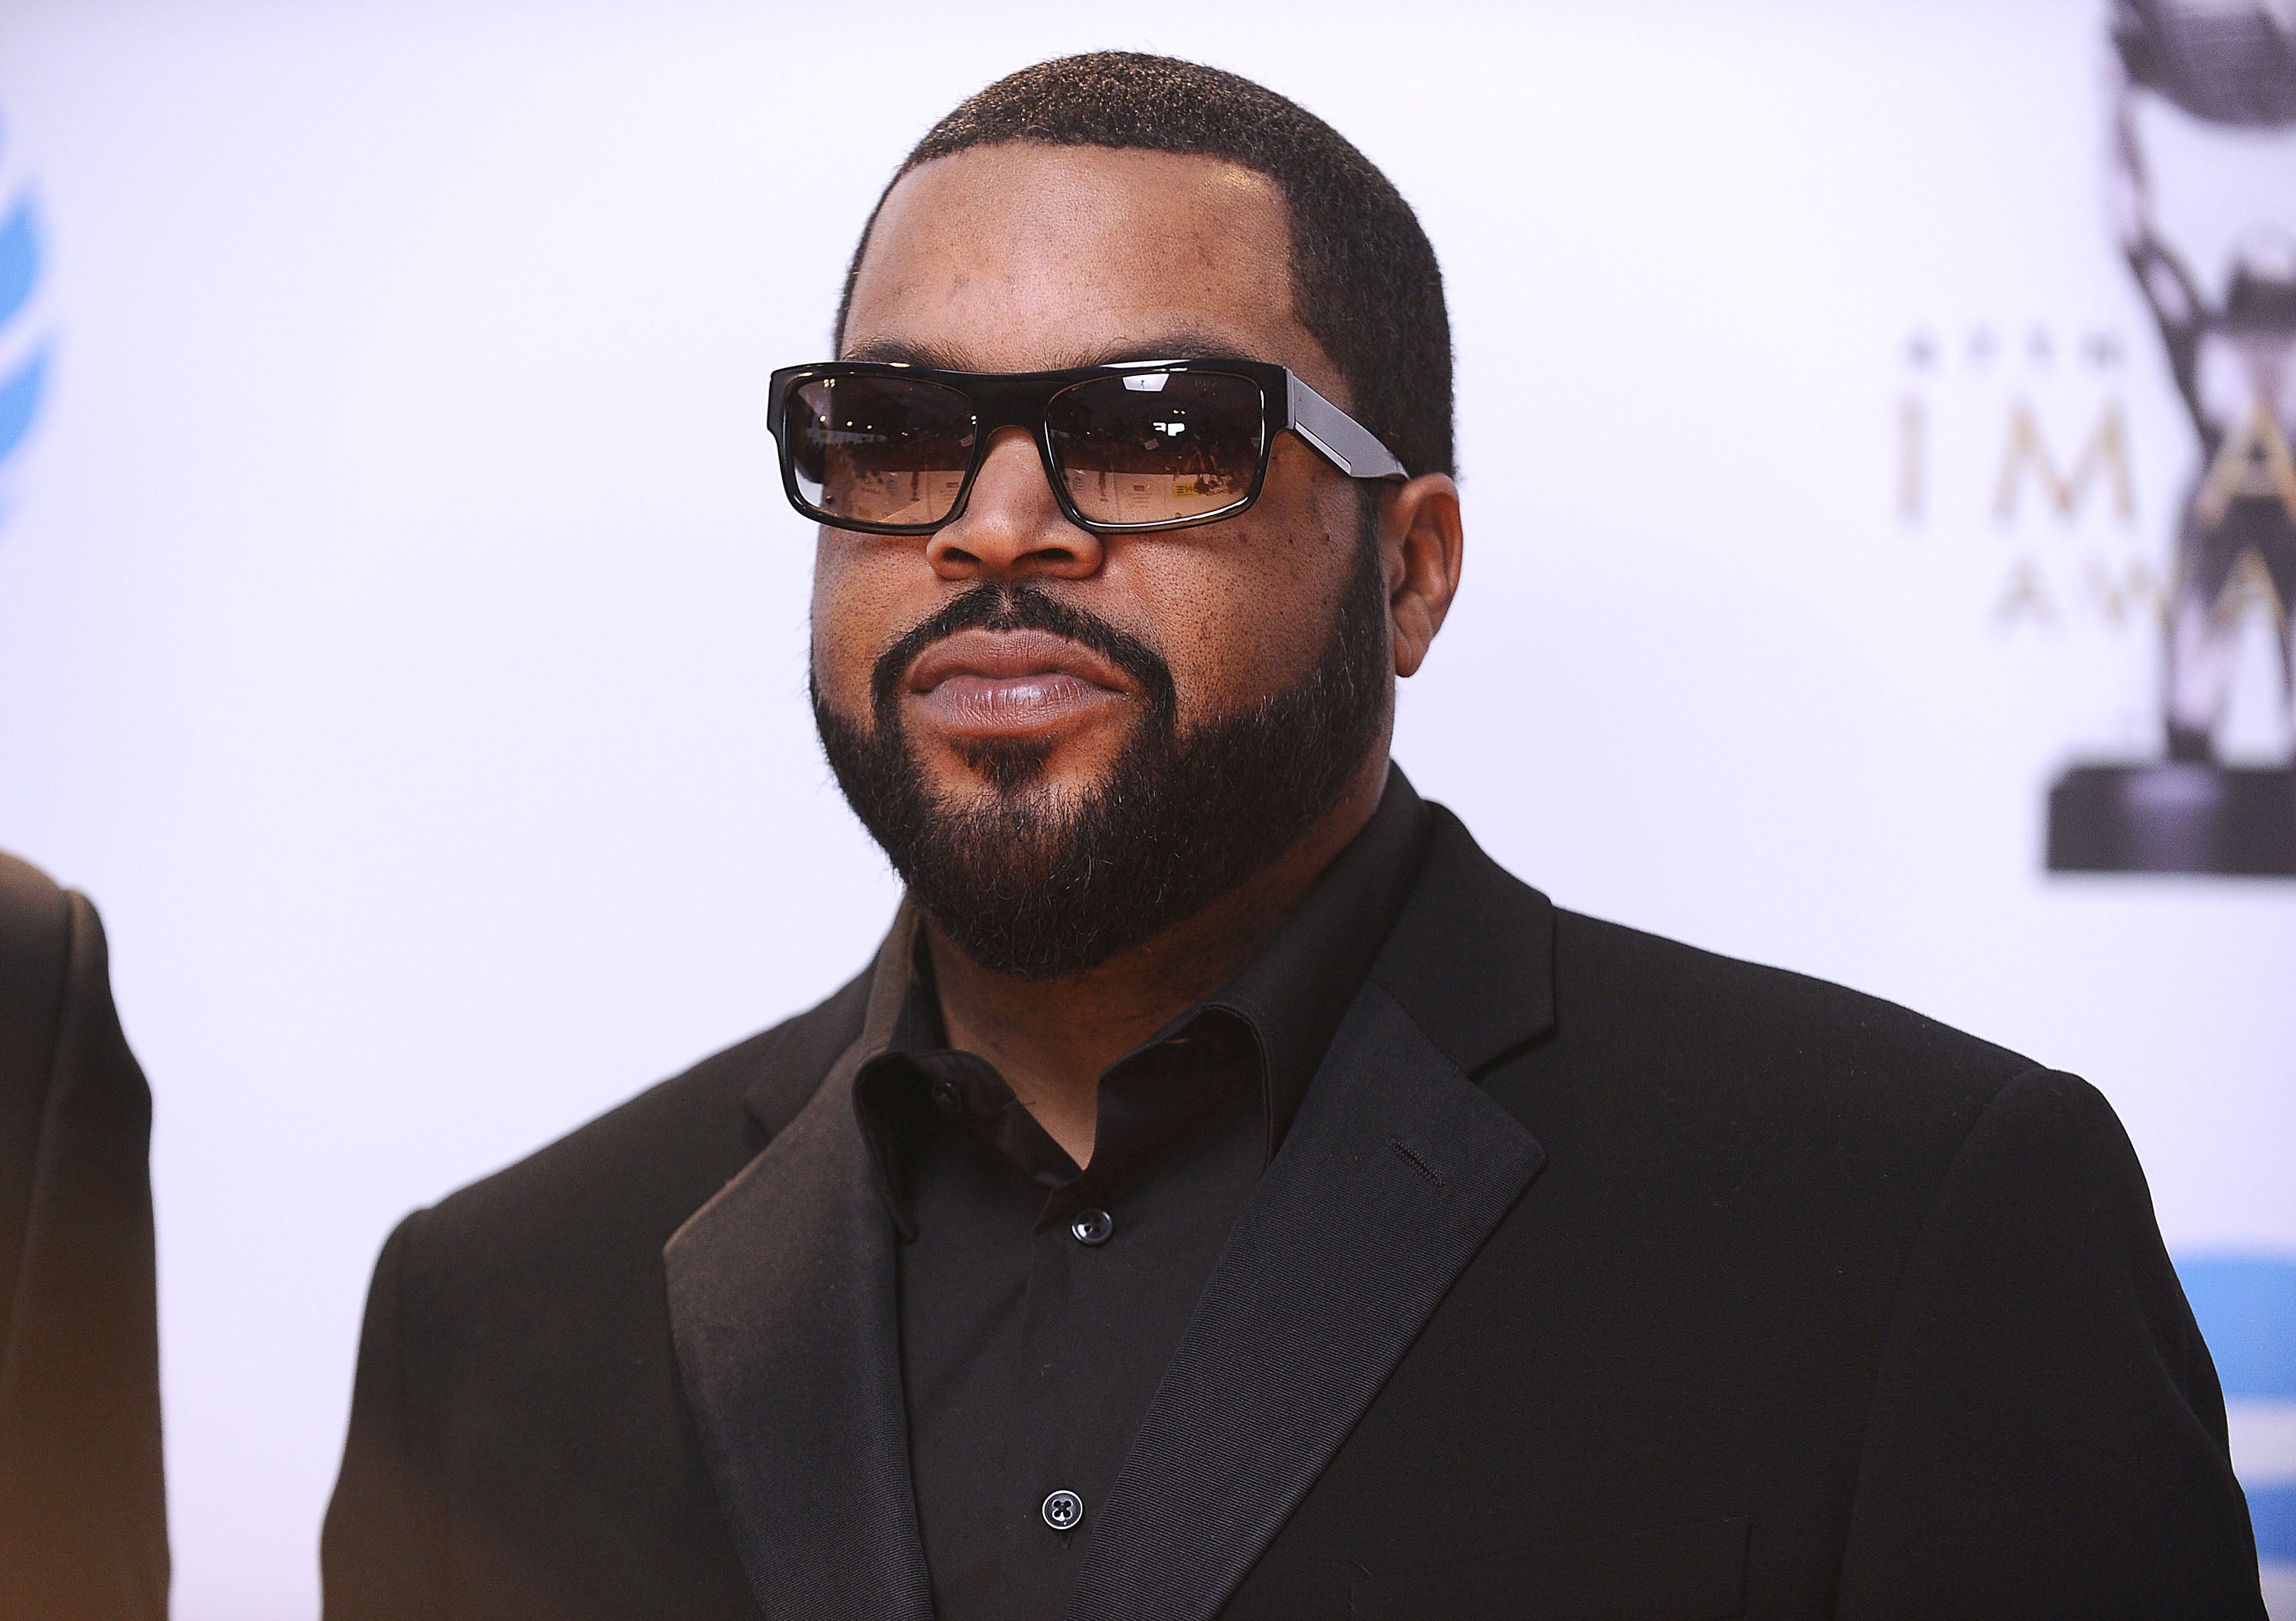 It's Official: Ice Cube Confirms Another 'Friday' Film Is In The Works
